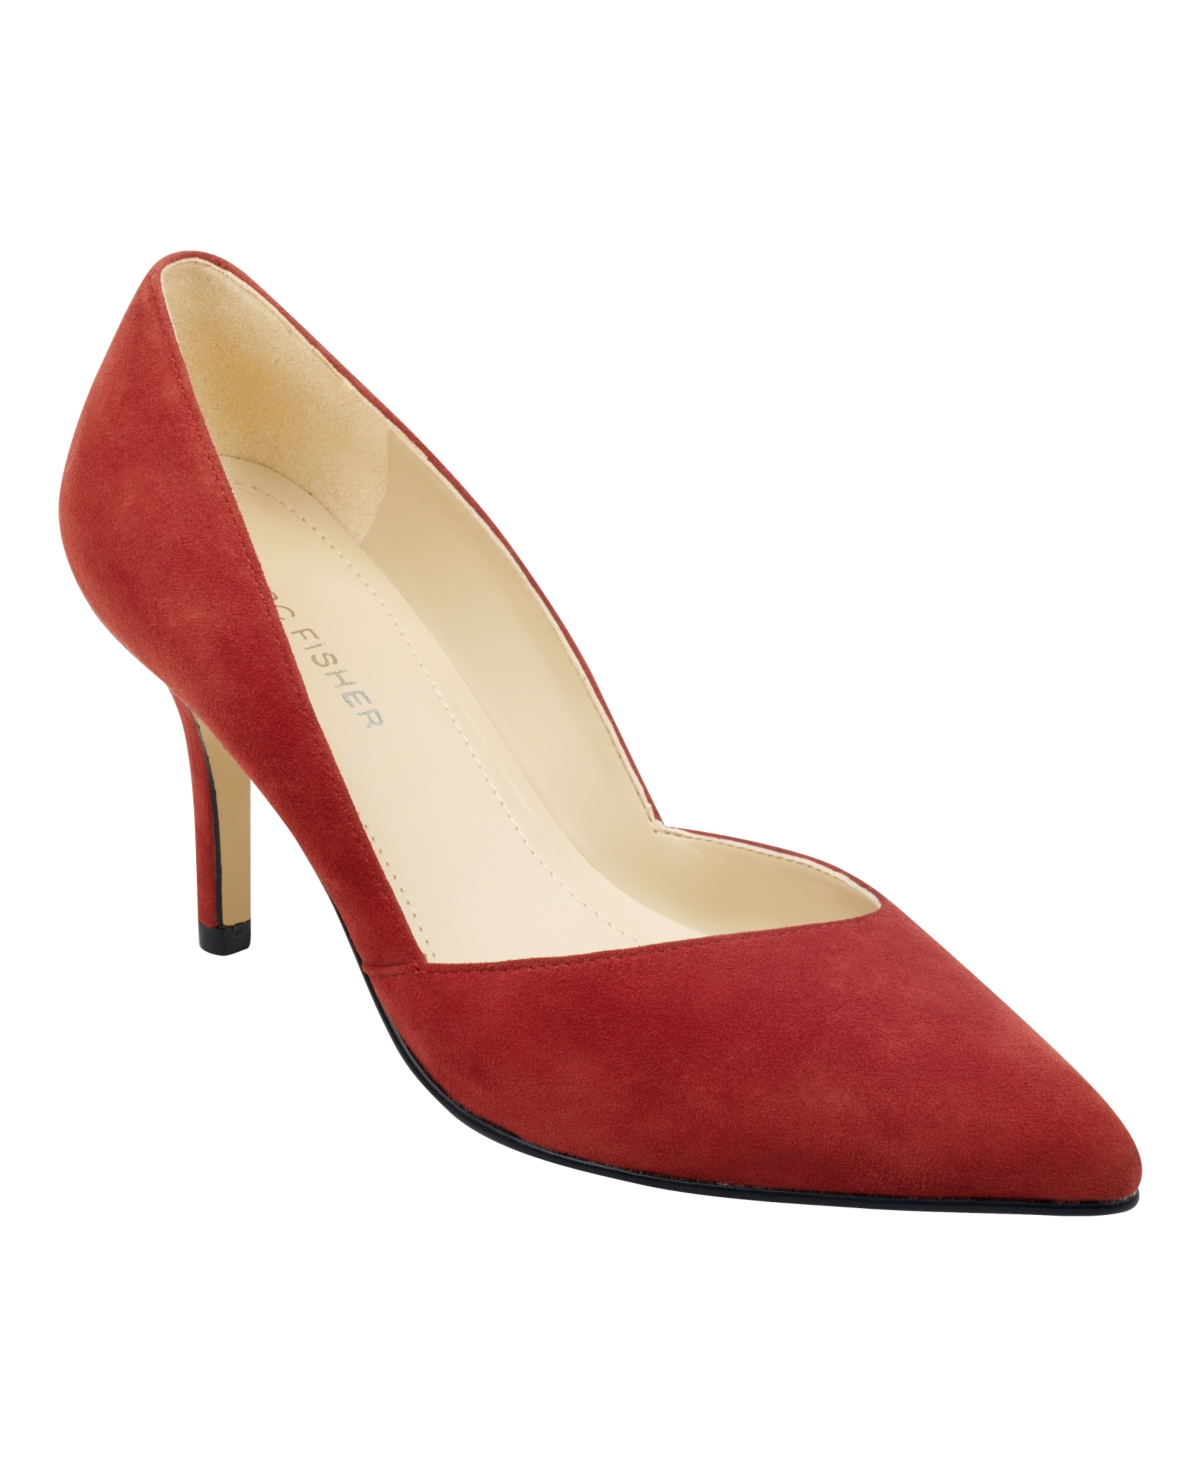 Women's Tuscany Slip On Stiletto Dress Pumps - Red Suede